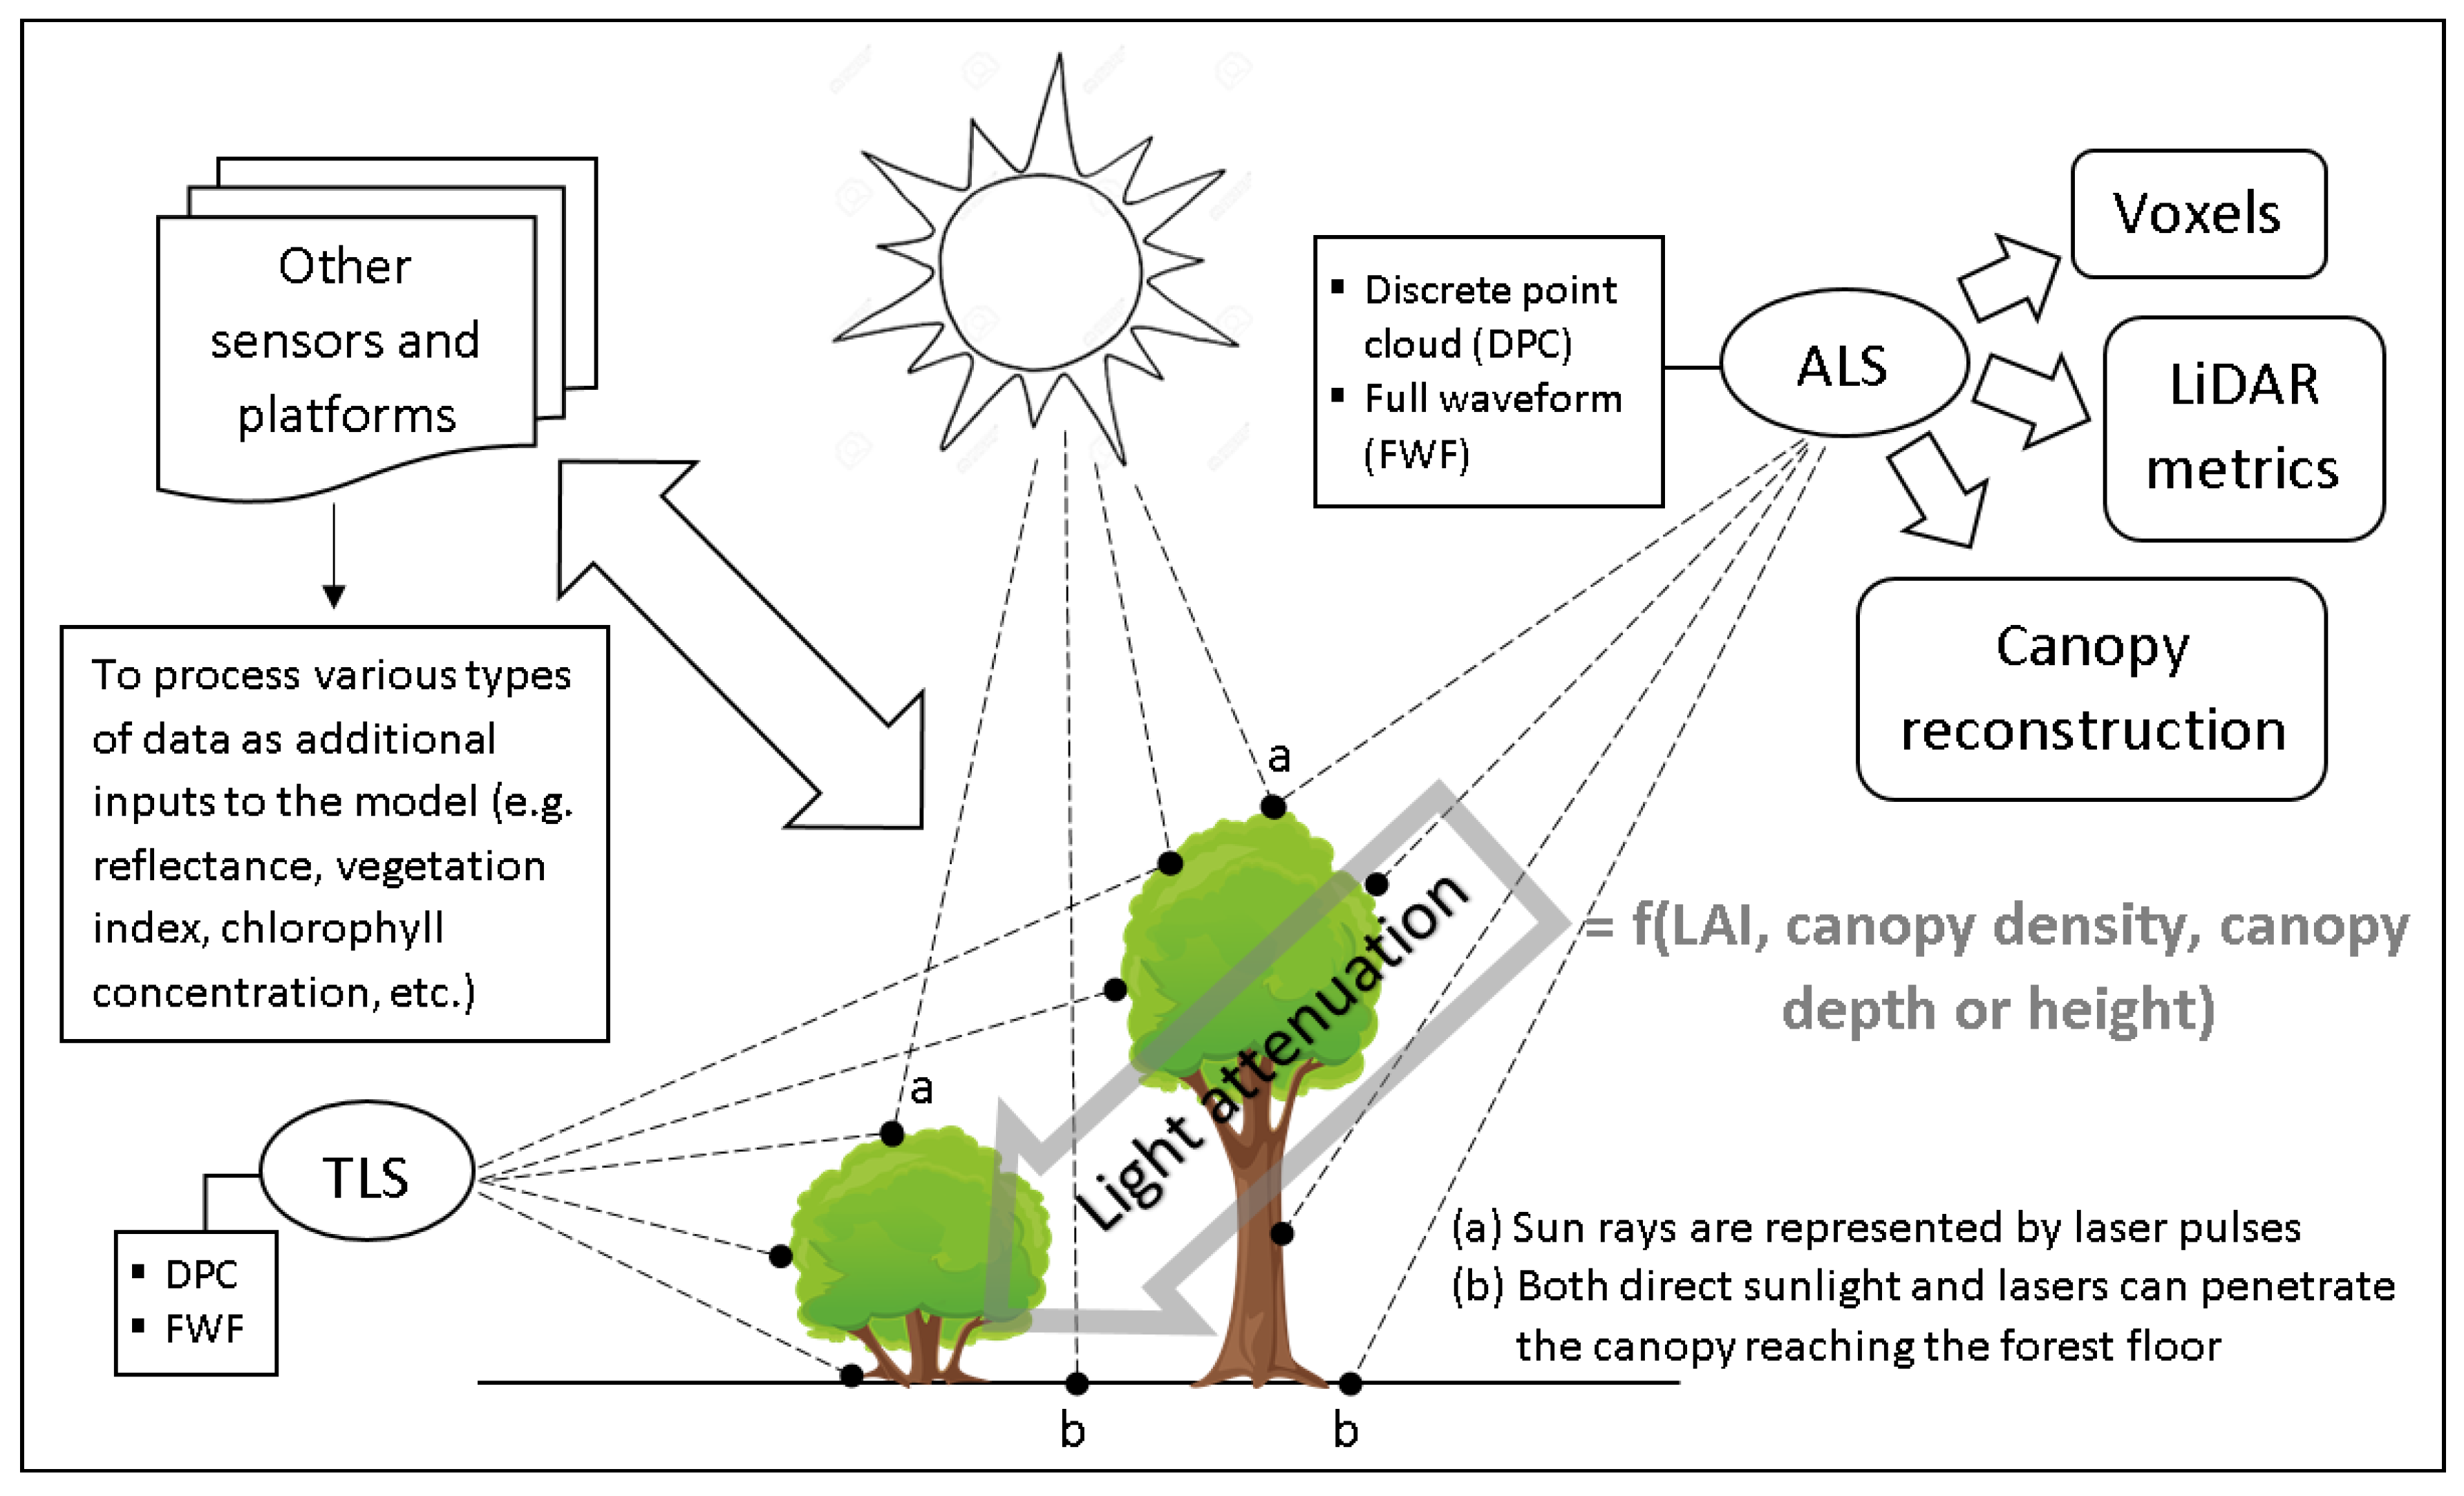 Remote Sensing | Free Full-Text | Modeling Solar Radiation in the Forest  Using Remote Sensing Data: A Review of Approaches and Opportunities | HTML